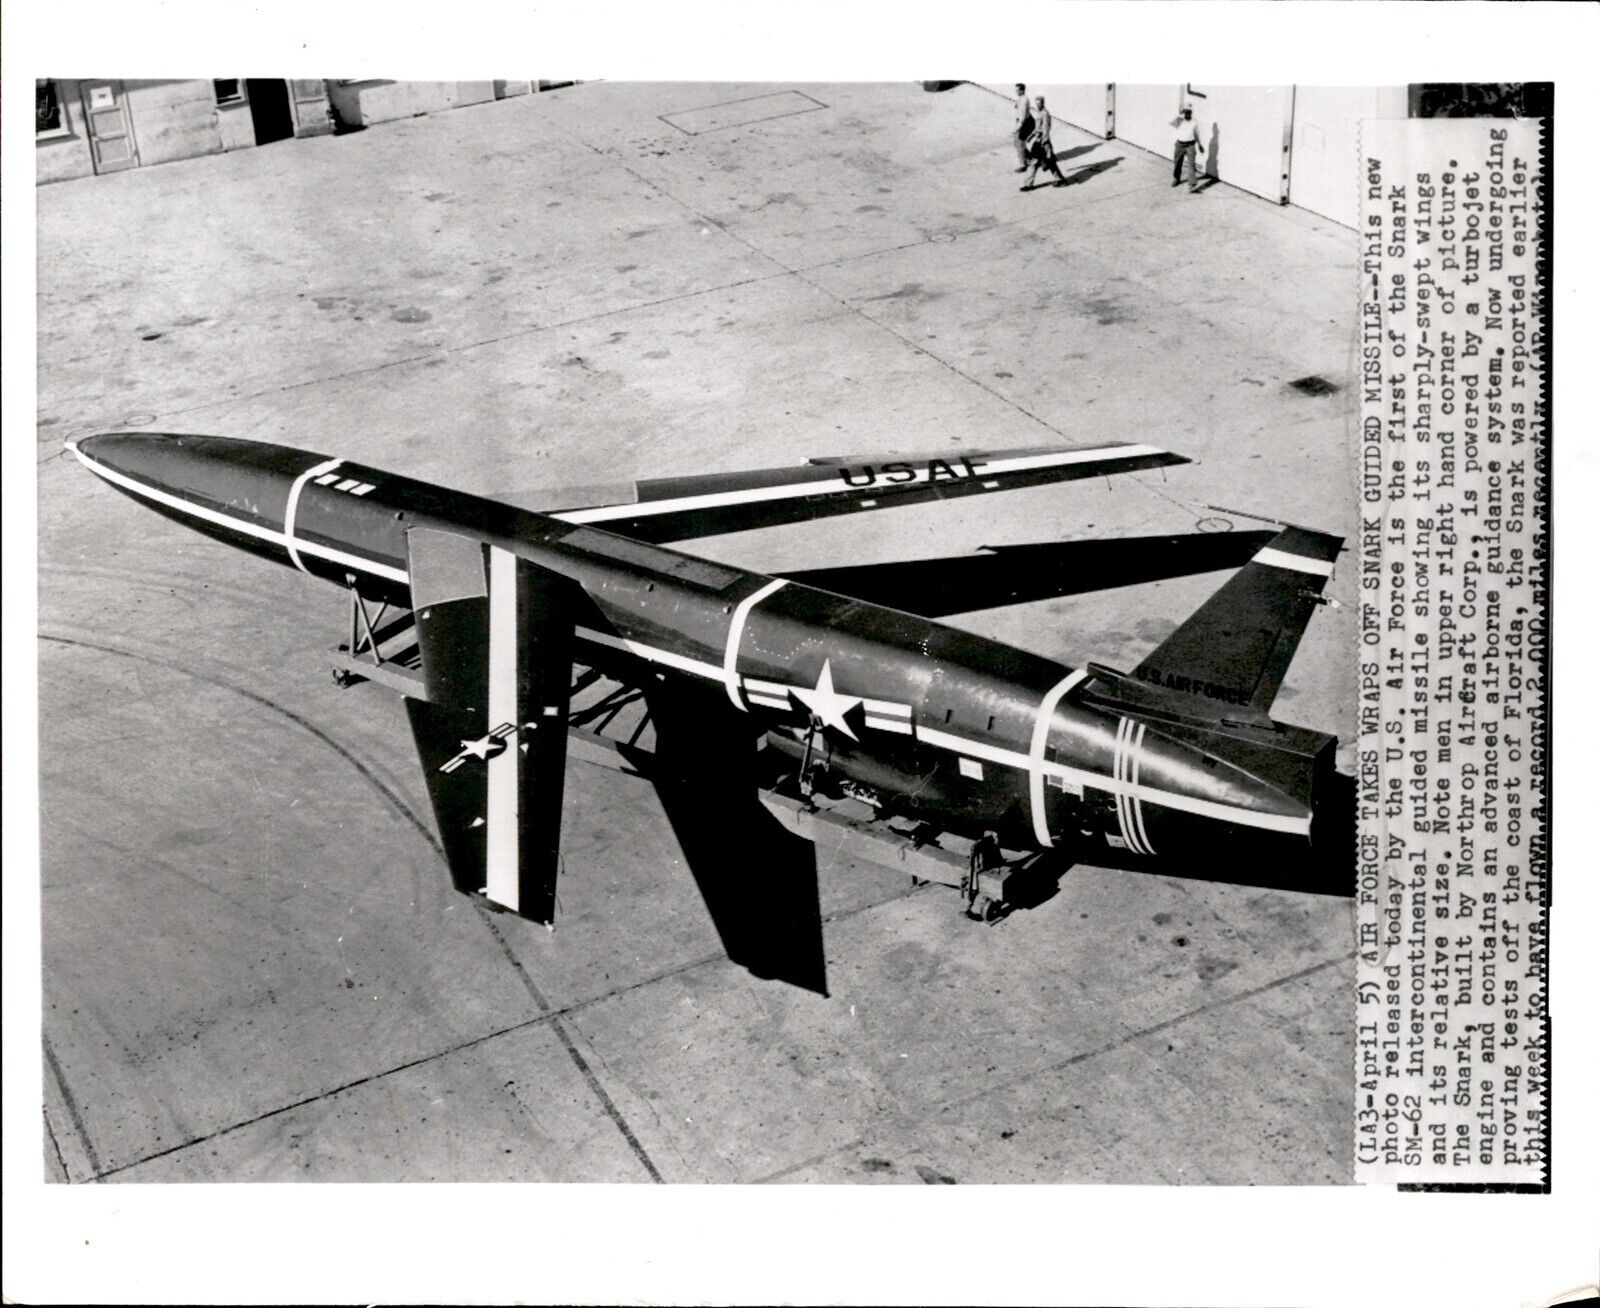 LD316 1958 Wire Photo AIR FORCE TAKES WRAPS OFF MISSILE Snark Guided Weapon